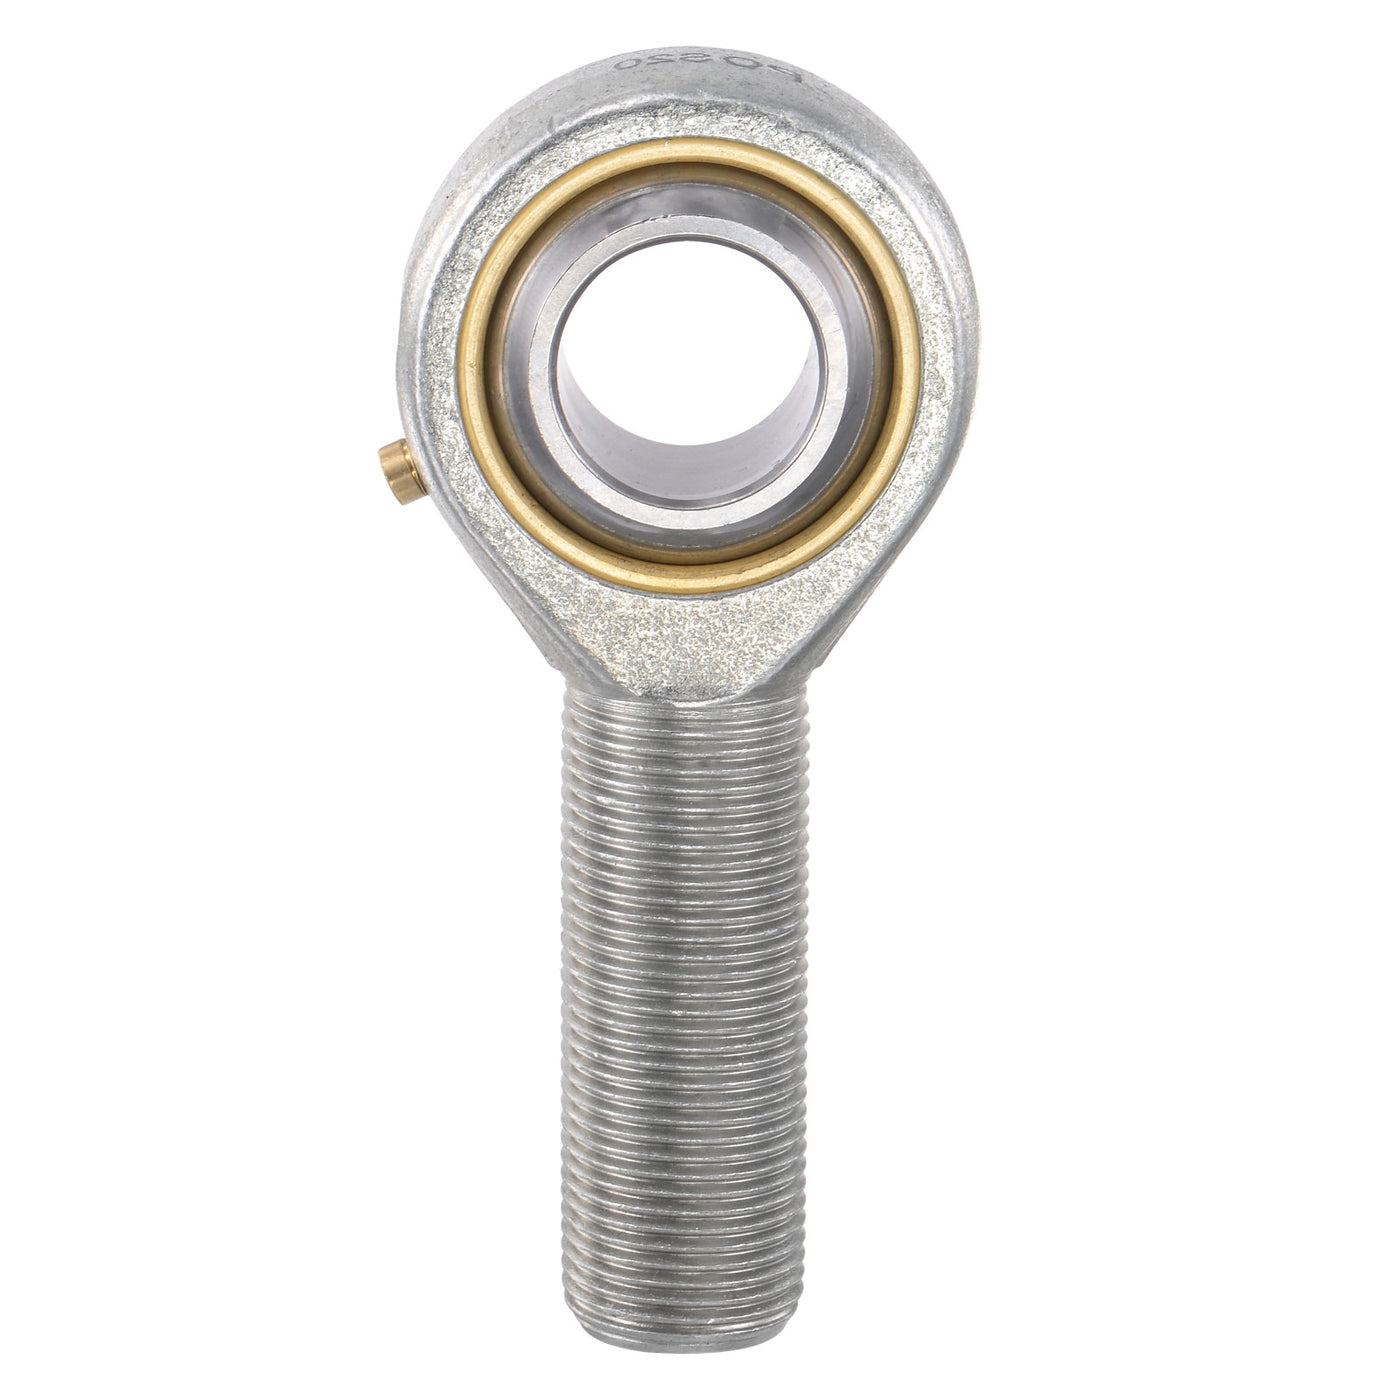 uxcell Uxcell POS20 Rod End Bearing 20mm Bore Self-lubricated M20x1.5 Right Hand Male Thread